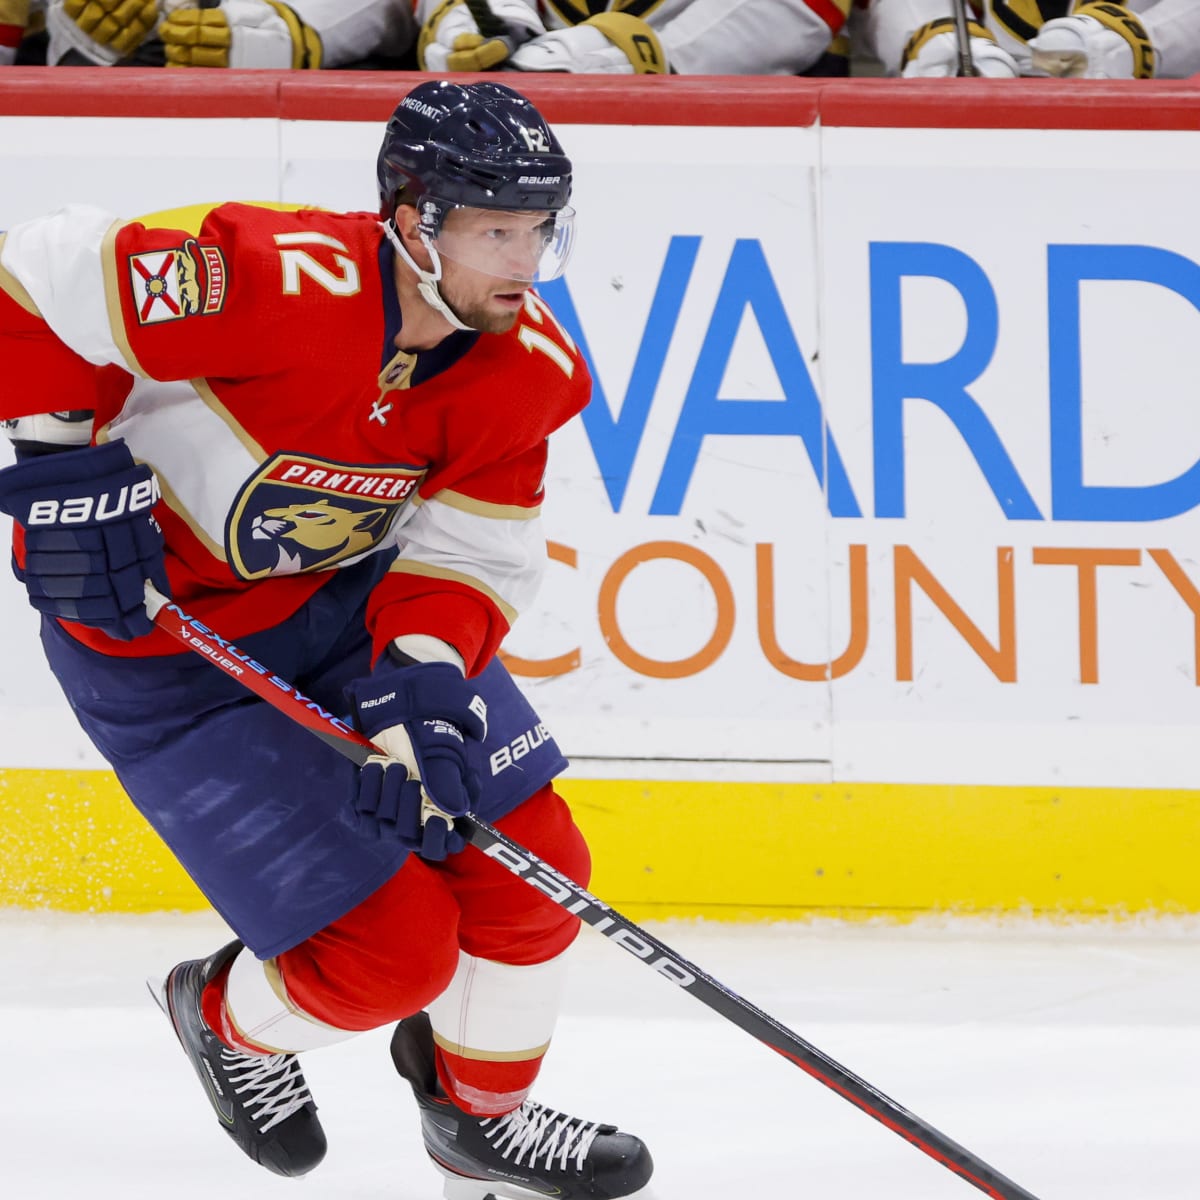 Florida Panthers Wearing Special Warmup Jerseys for Pride Night